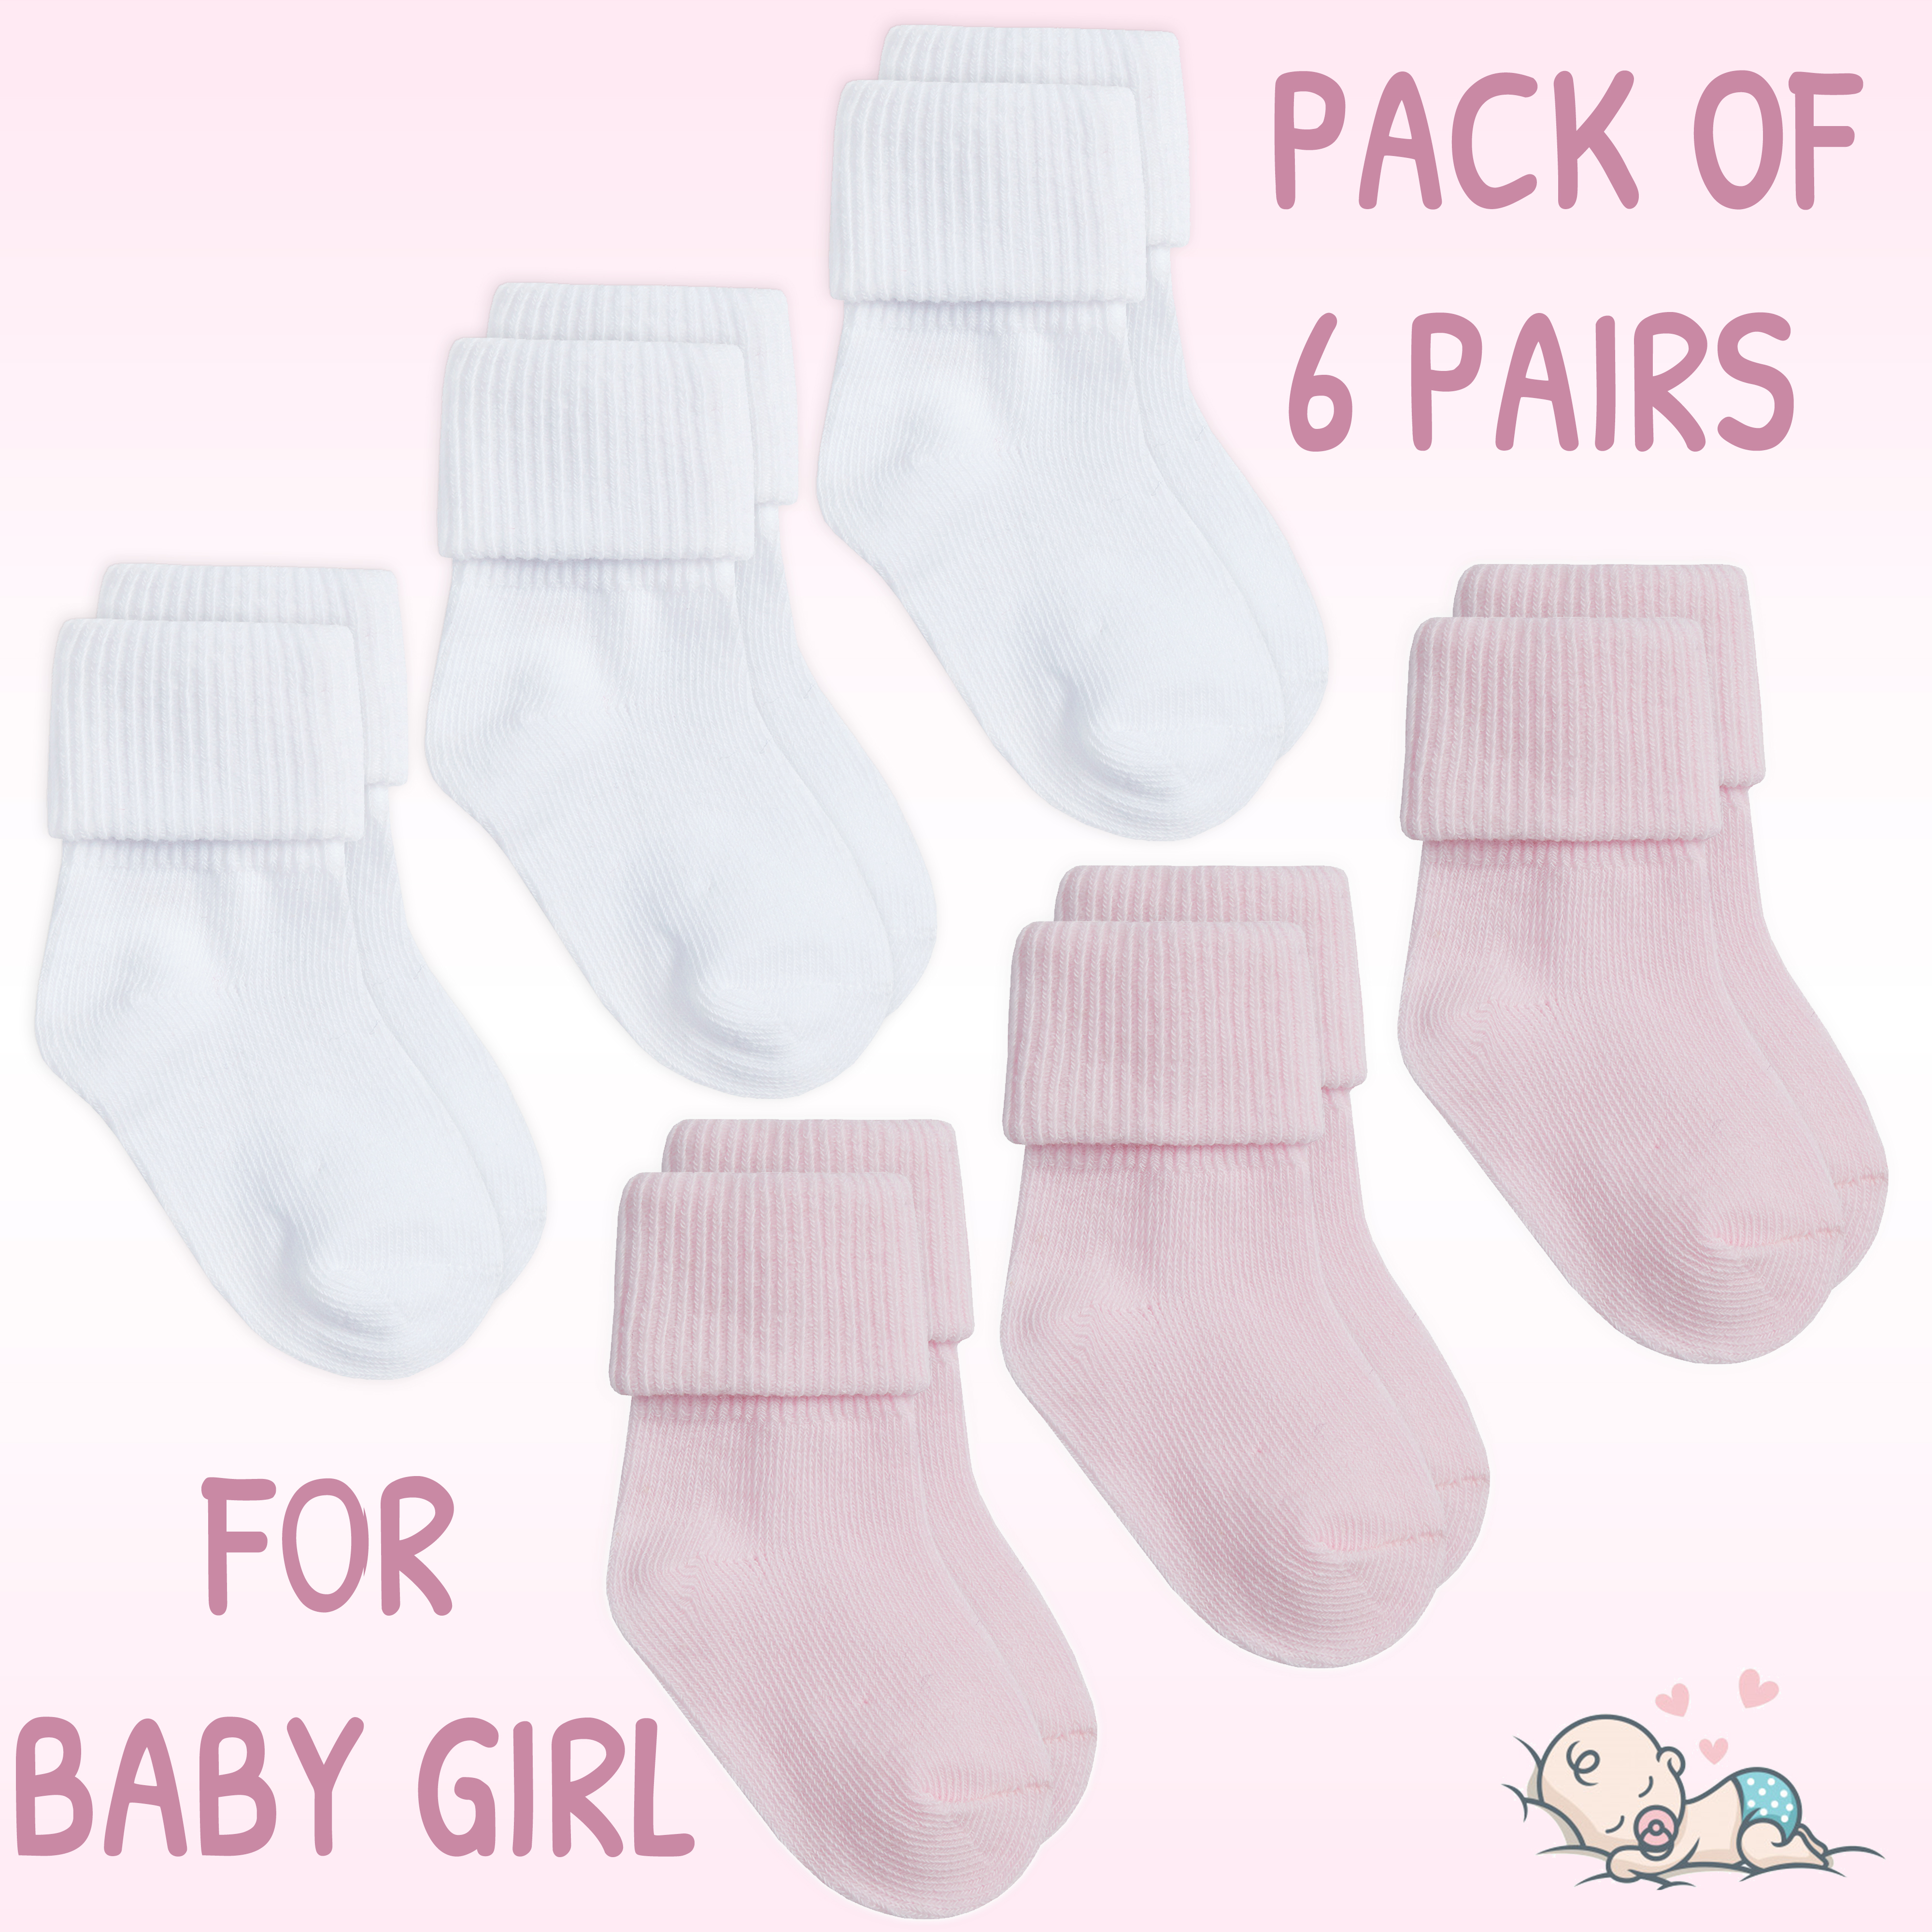 6 Pairs Of Soft Baby Socks Everyday Wear Plain Pink & Mint Green Turn Over Socks 